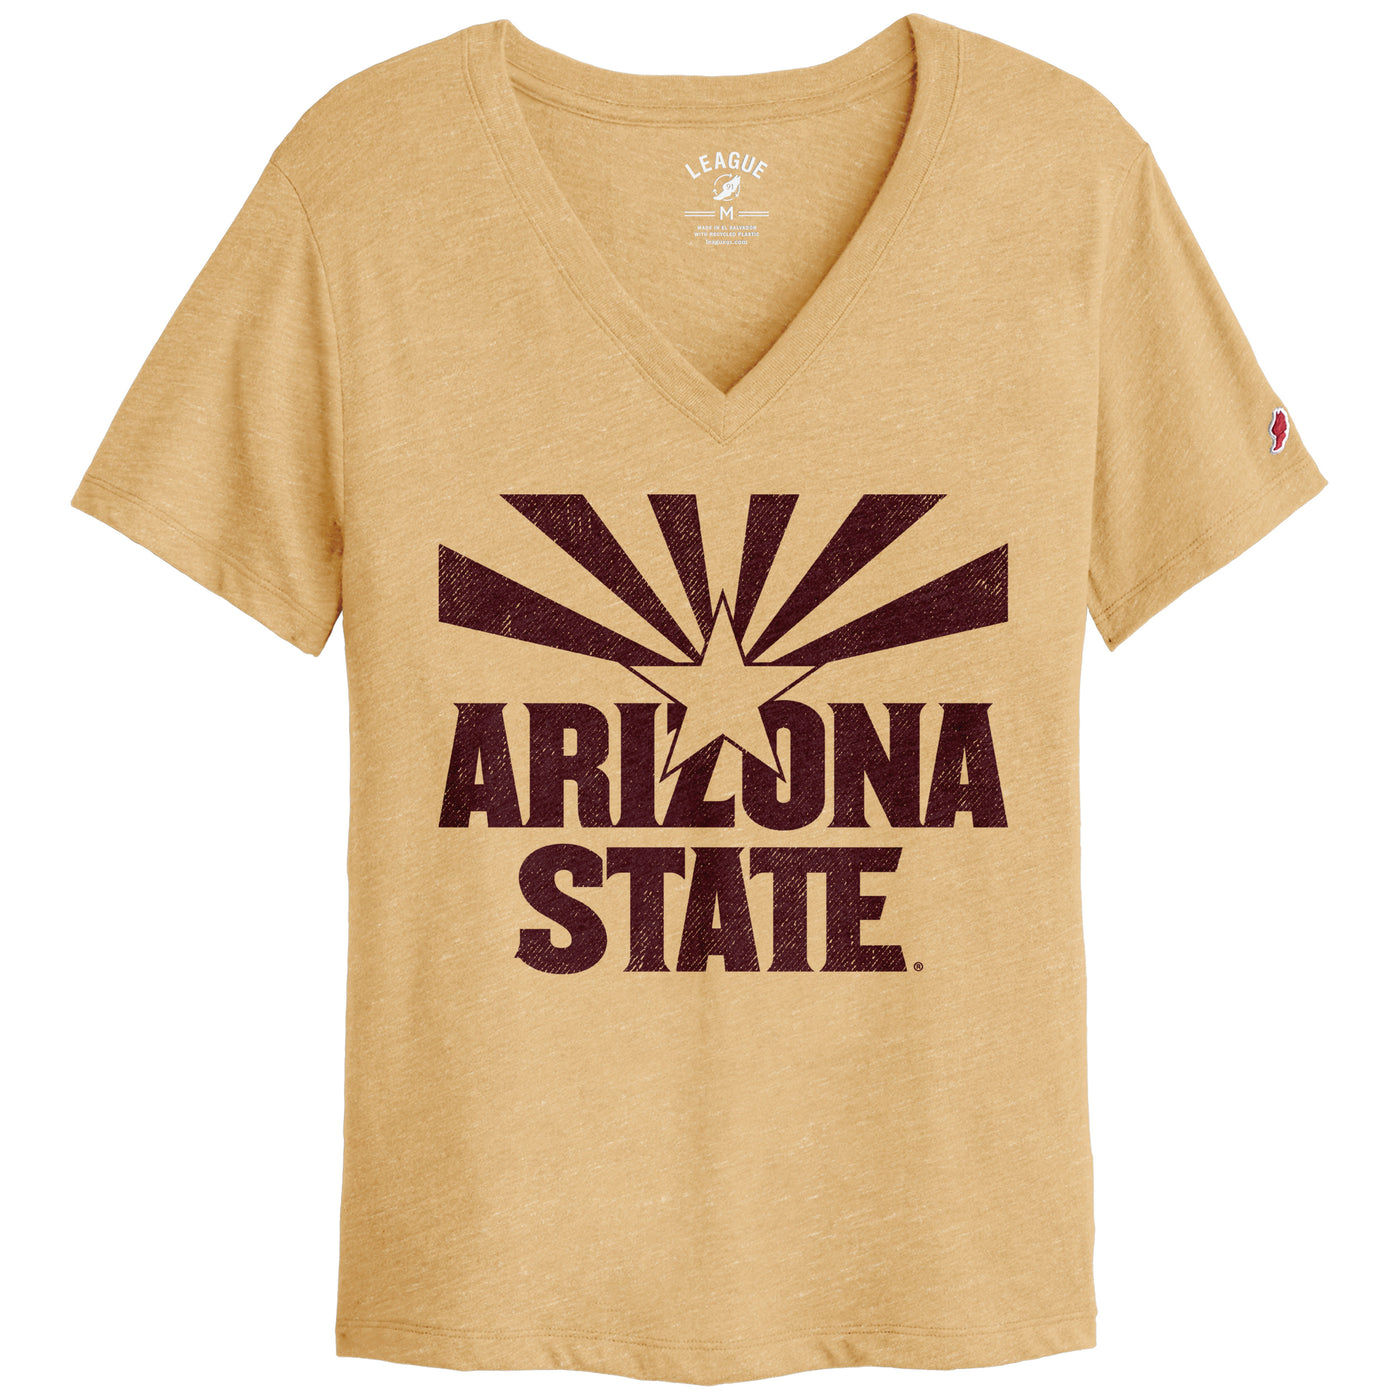 ASU v-neck gold shirt with maroon Arizona state flag outline above the text 